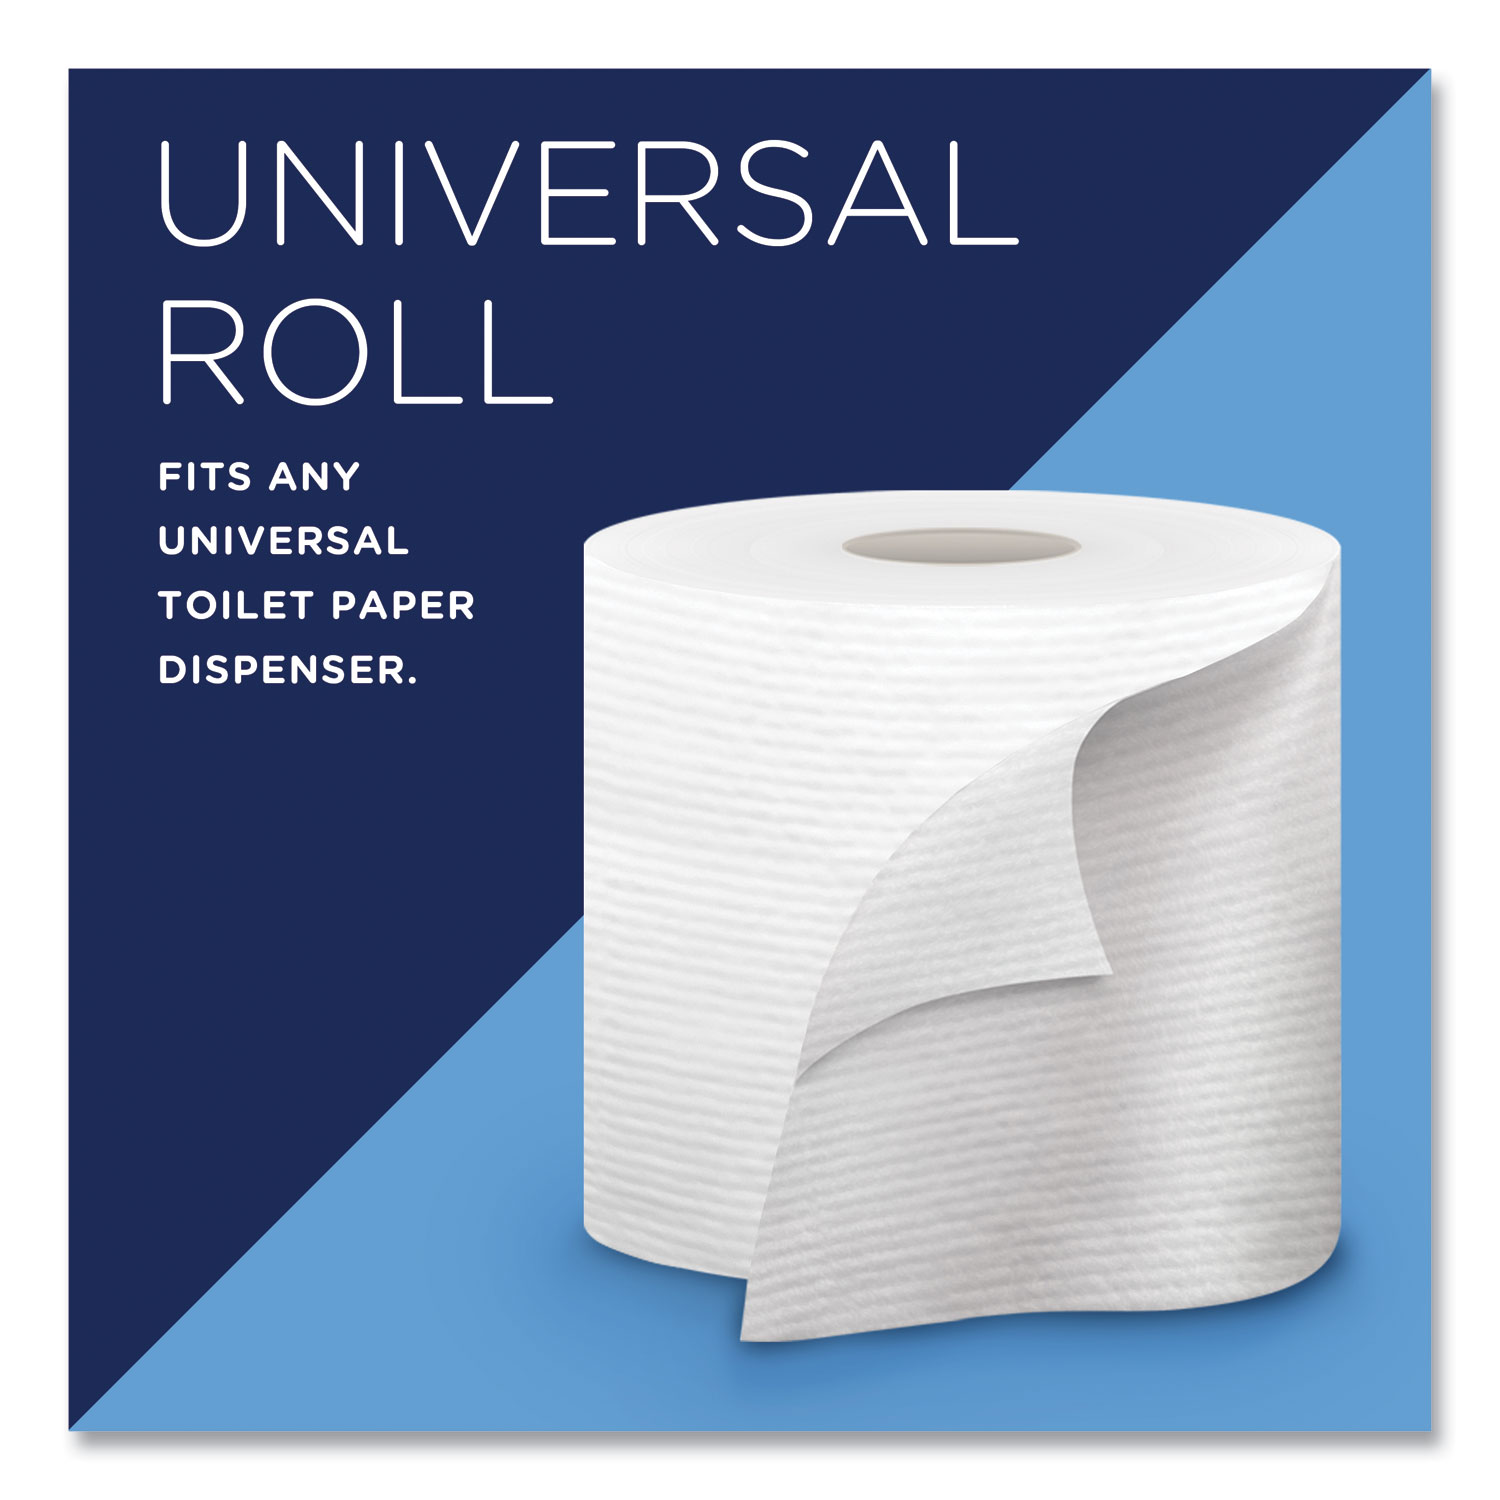 Cottonelle® Professional Standard Roll Toilet Paper (17713), 2-Ply, White,  (451 Sheets/Roll, 60 Rolls/Case, 27,060 Sheets/Case)